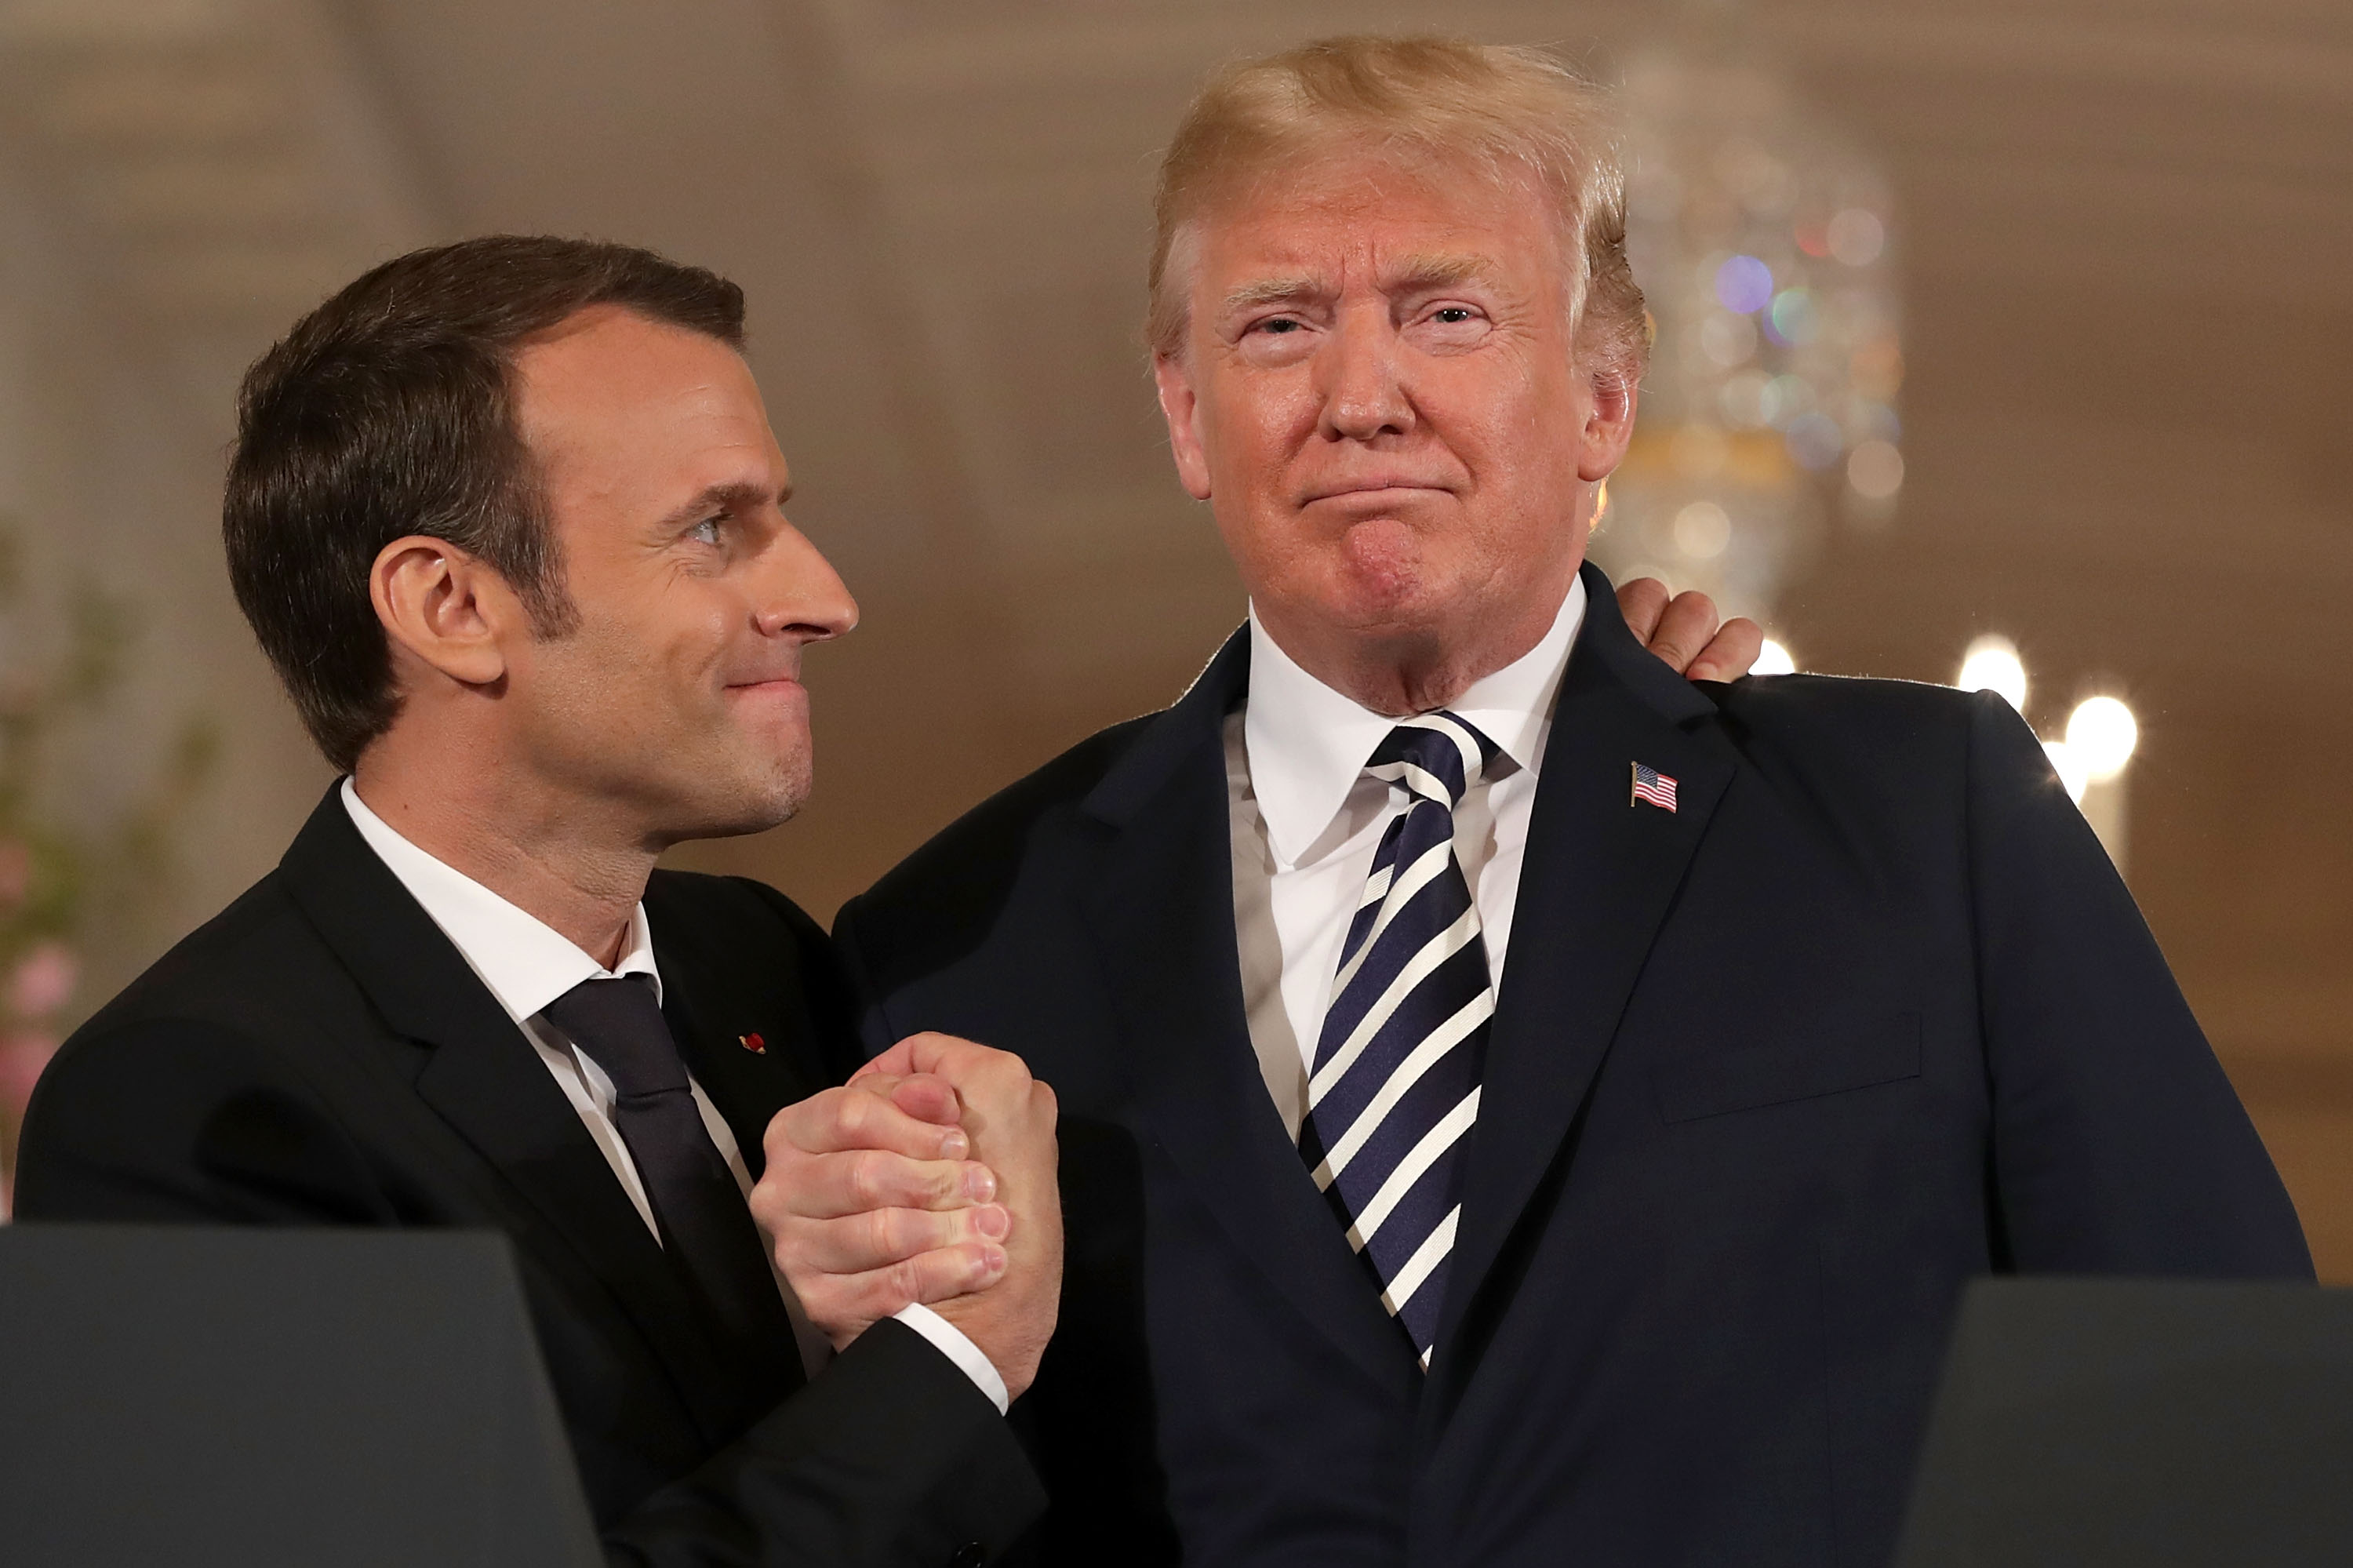 French President Emmanuel Macron (L) and U.S. President Donald Trump embrace at the completion of a joint press conference in the East Room of the White House in Washington, DC April 24, 2018. (Chip Somodevilla—Getty Images)